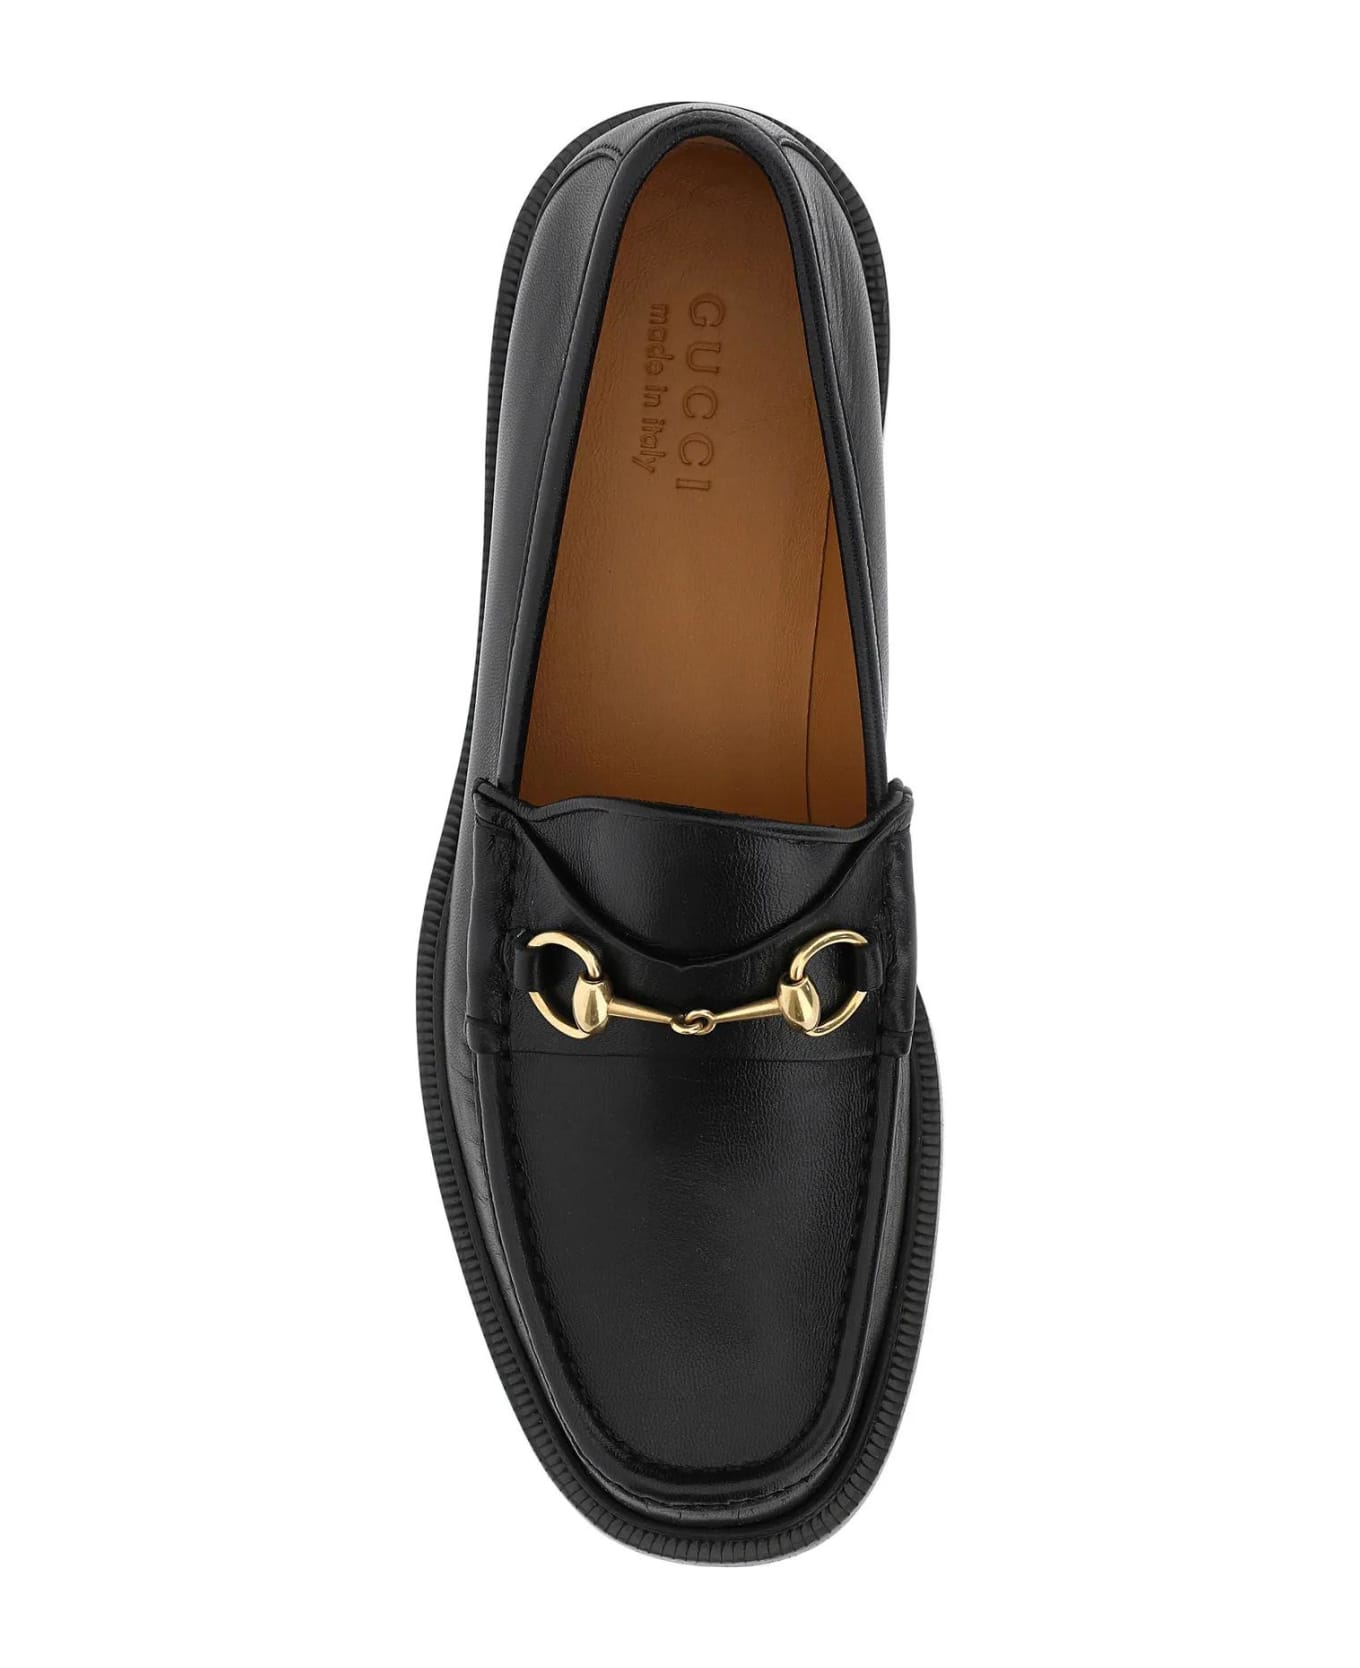 Gucci Black Leather Loafers - Black